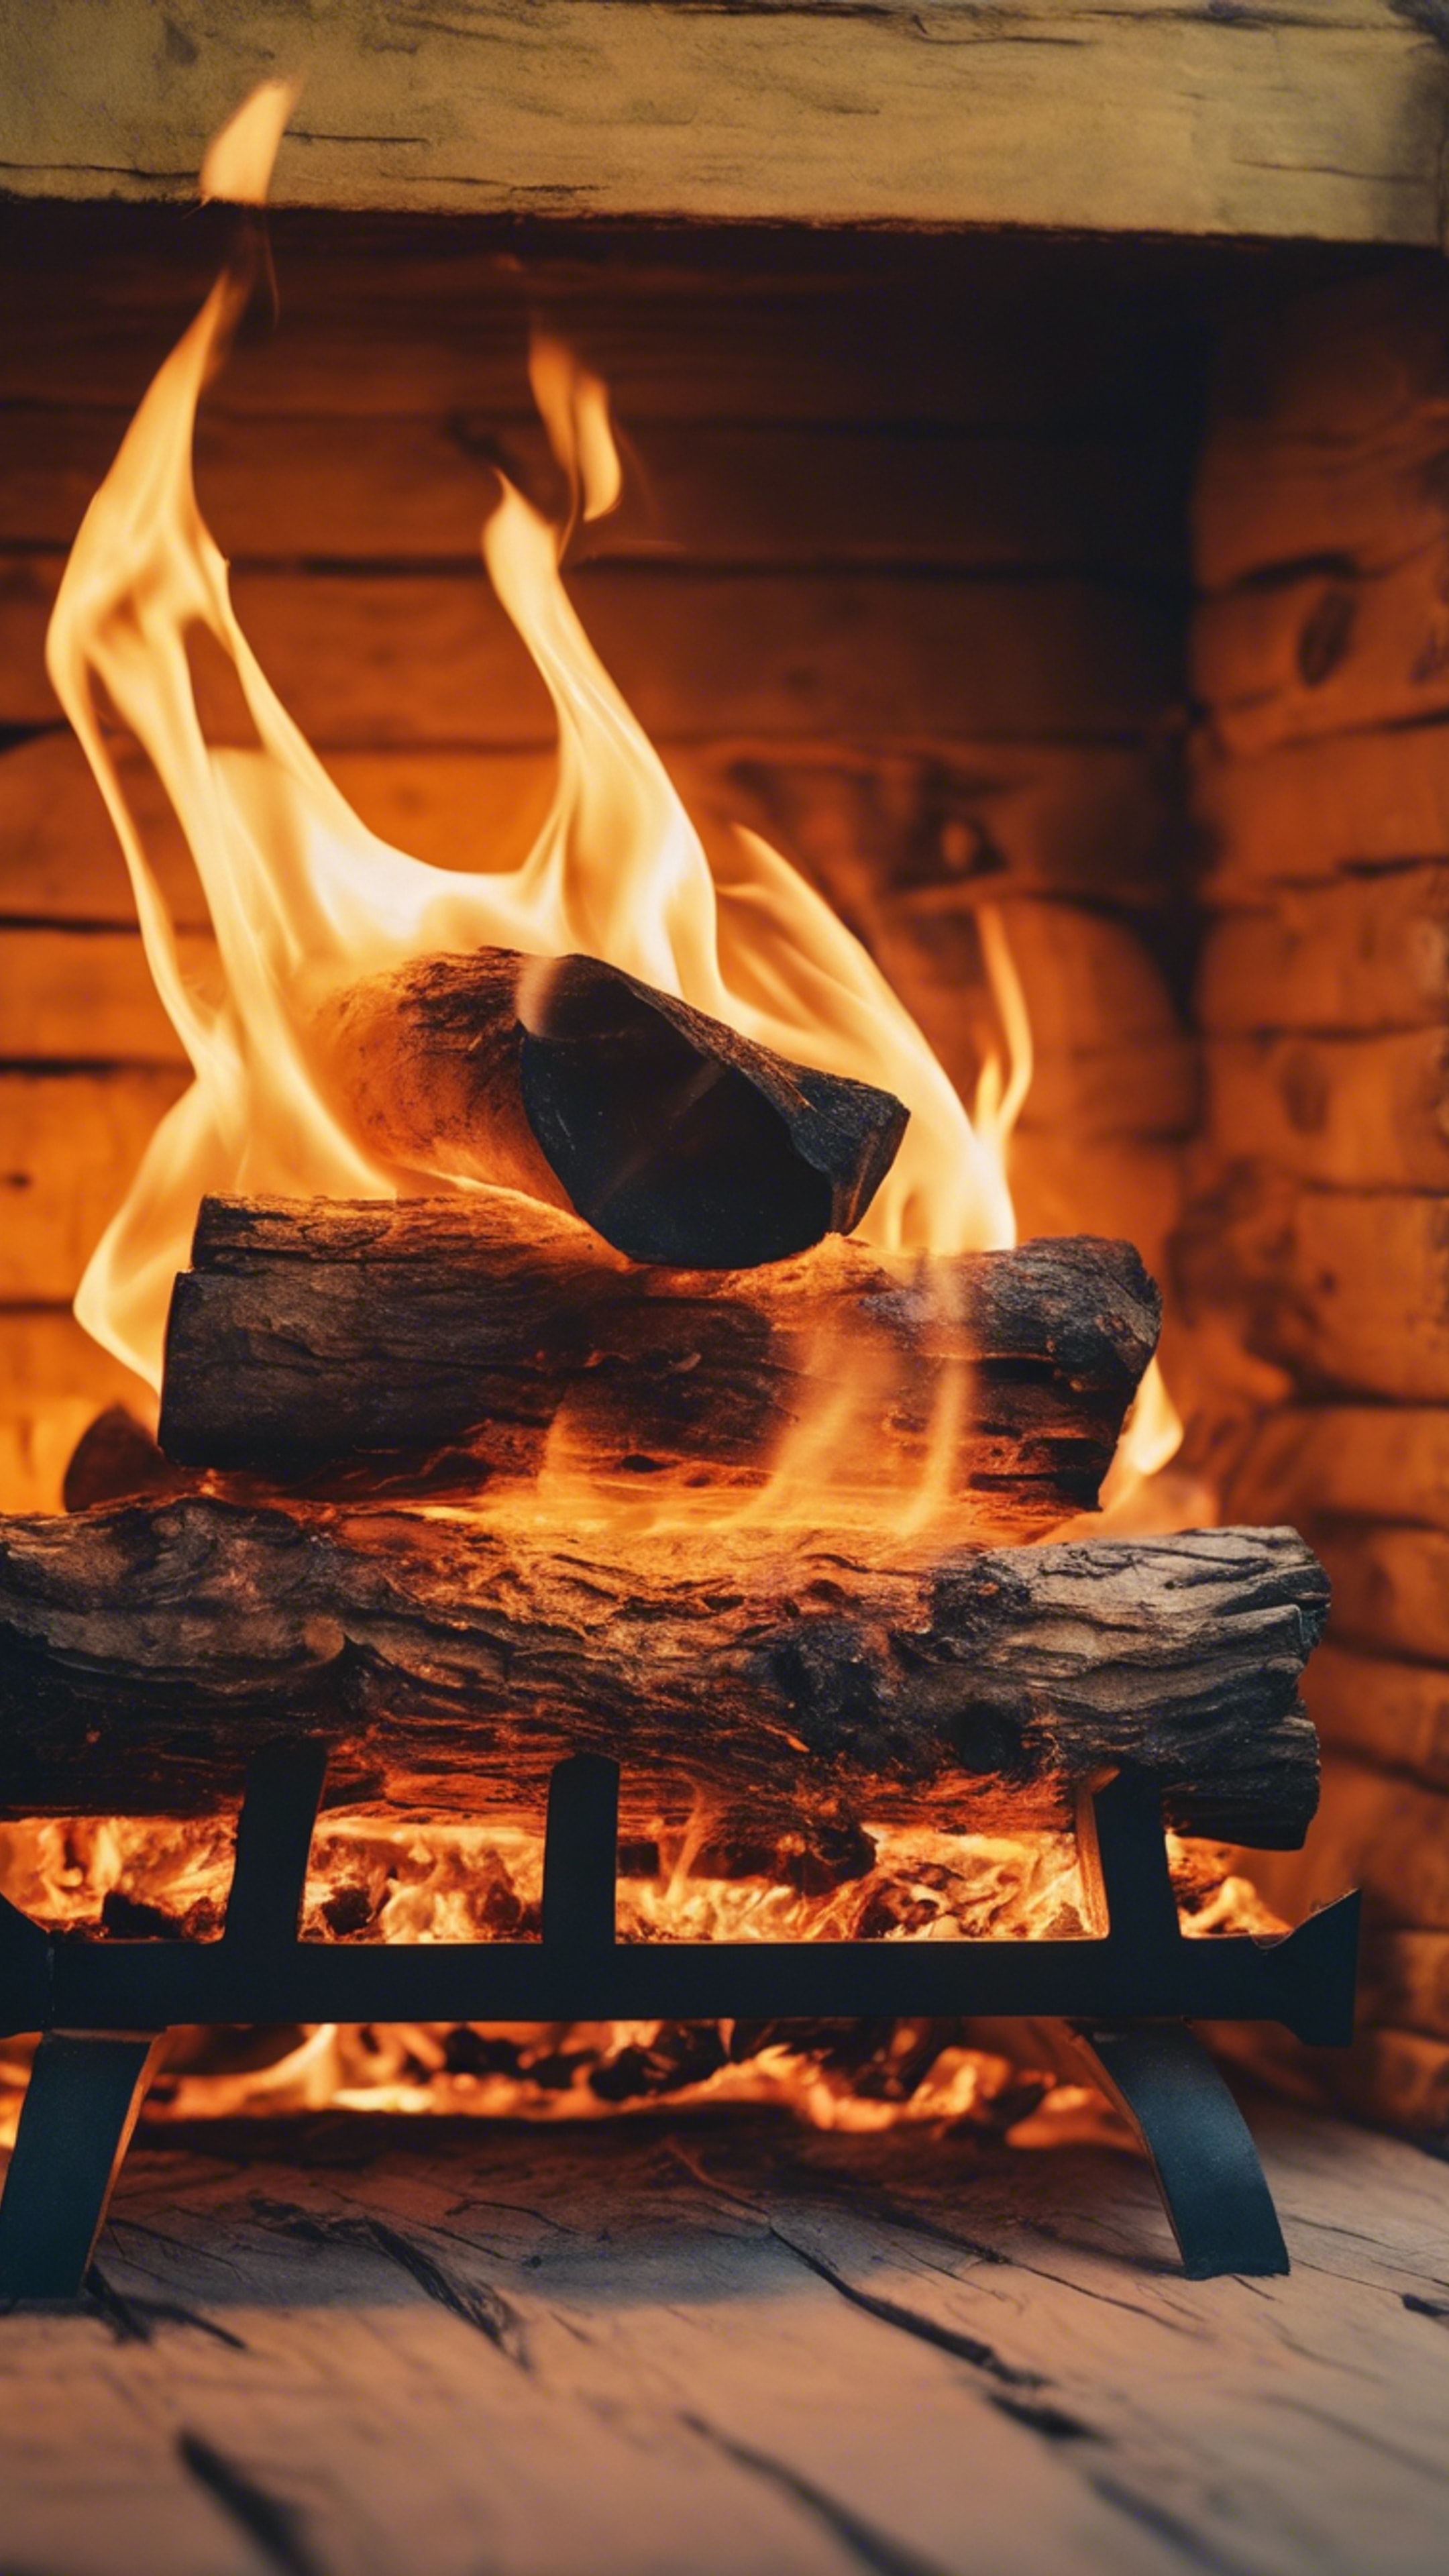 A fire crackling in wood fireplace with bright orange flames on a yellowish wooden background.壁紙[634561949a004dee8a58]